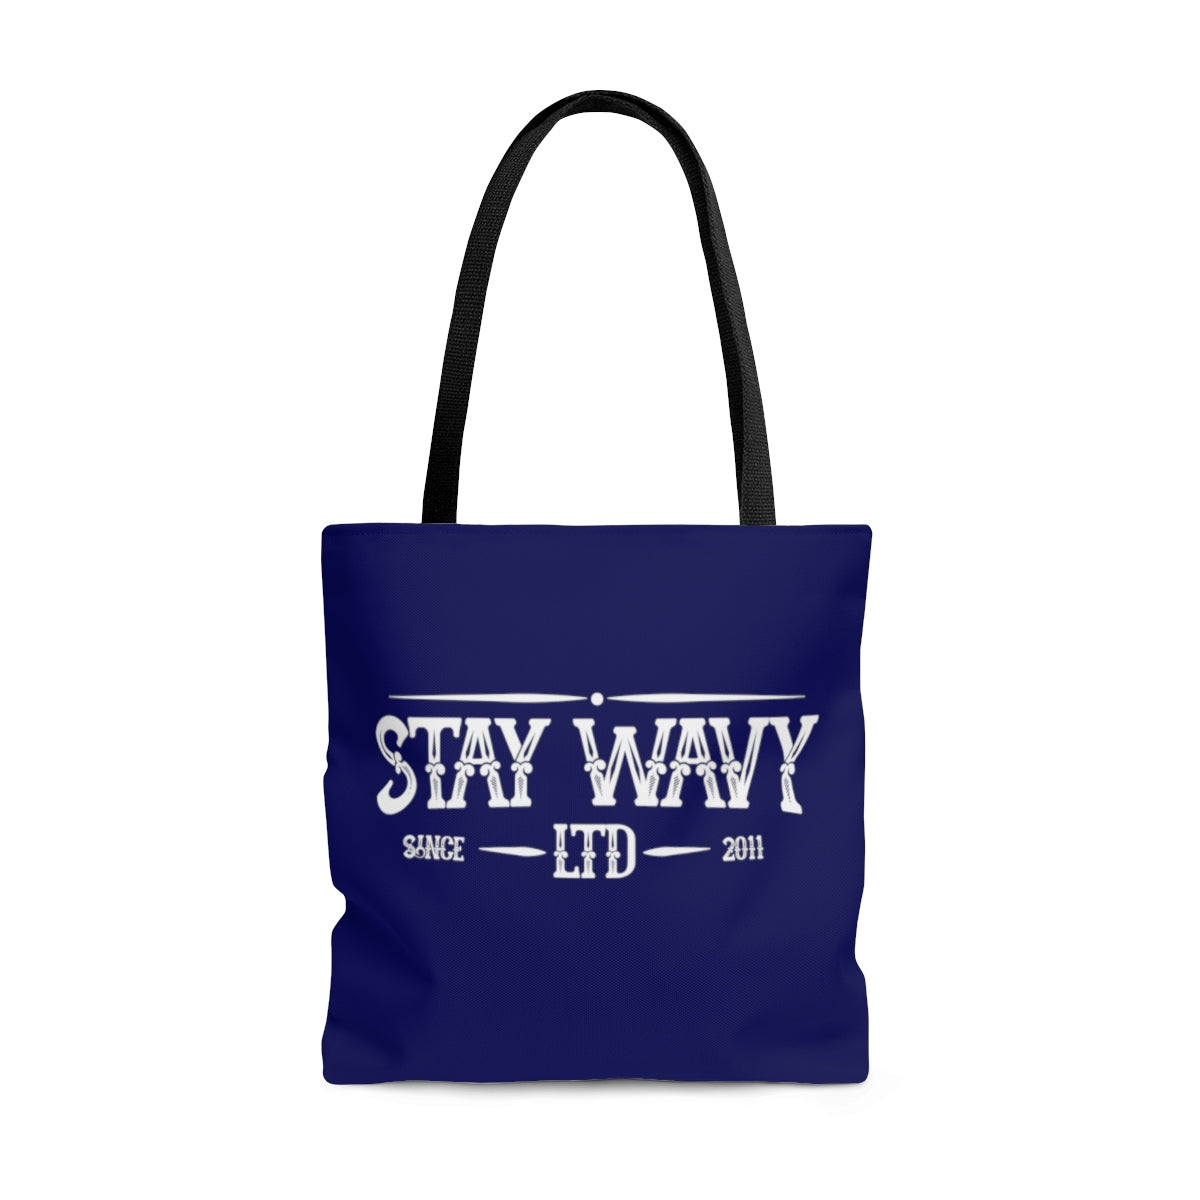 A.P. Tote Bag - Stay Wavy Inc